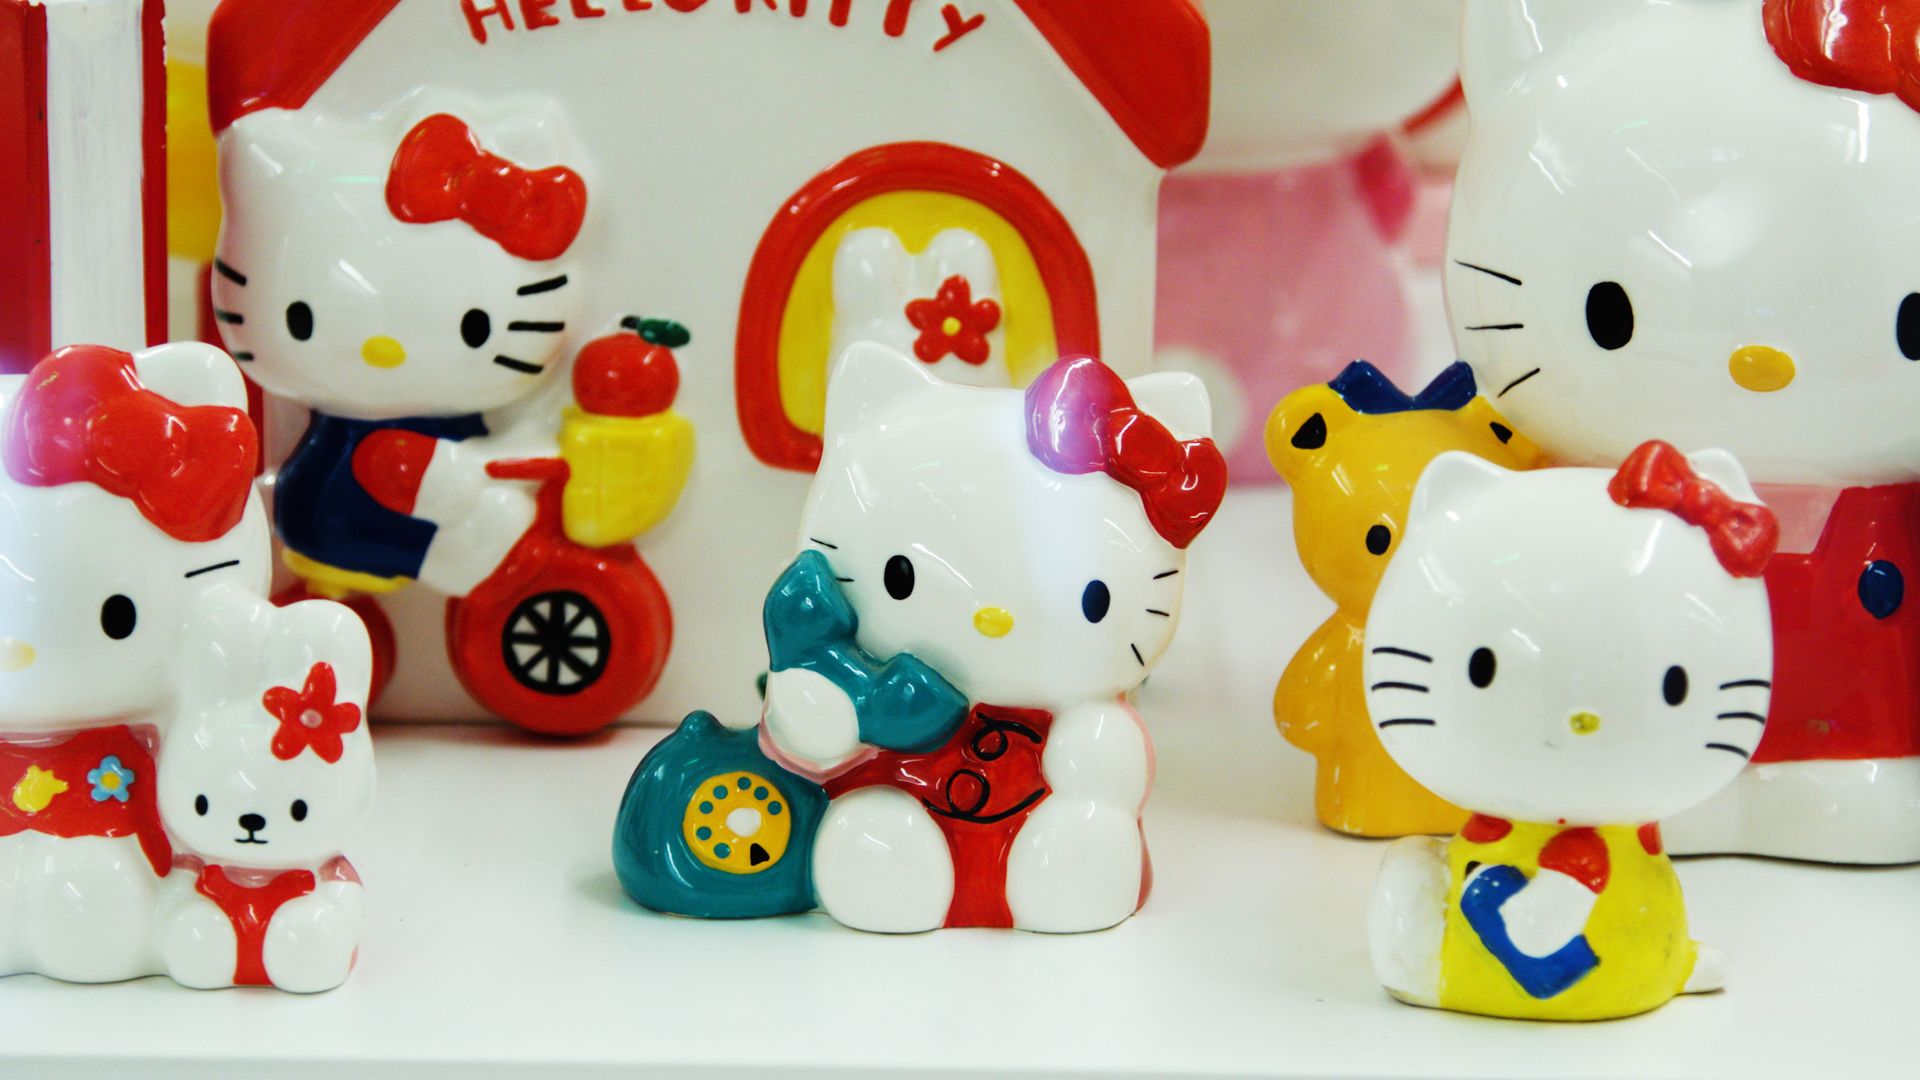 10 Places That Every Hello Kitty Fan Needs to Visit